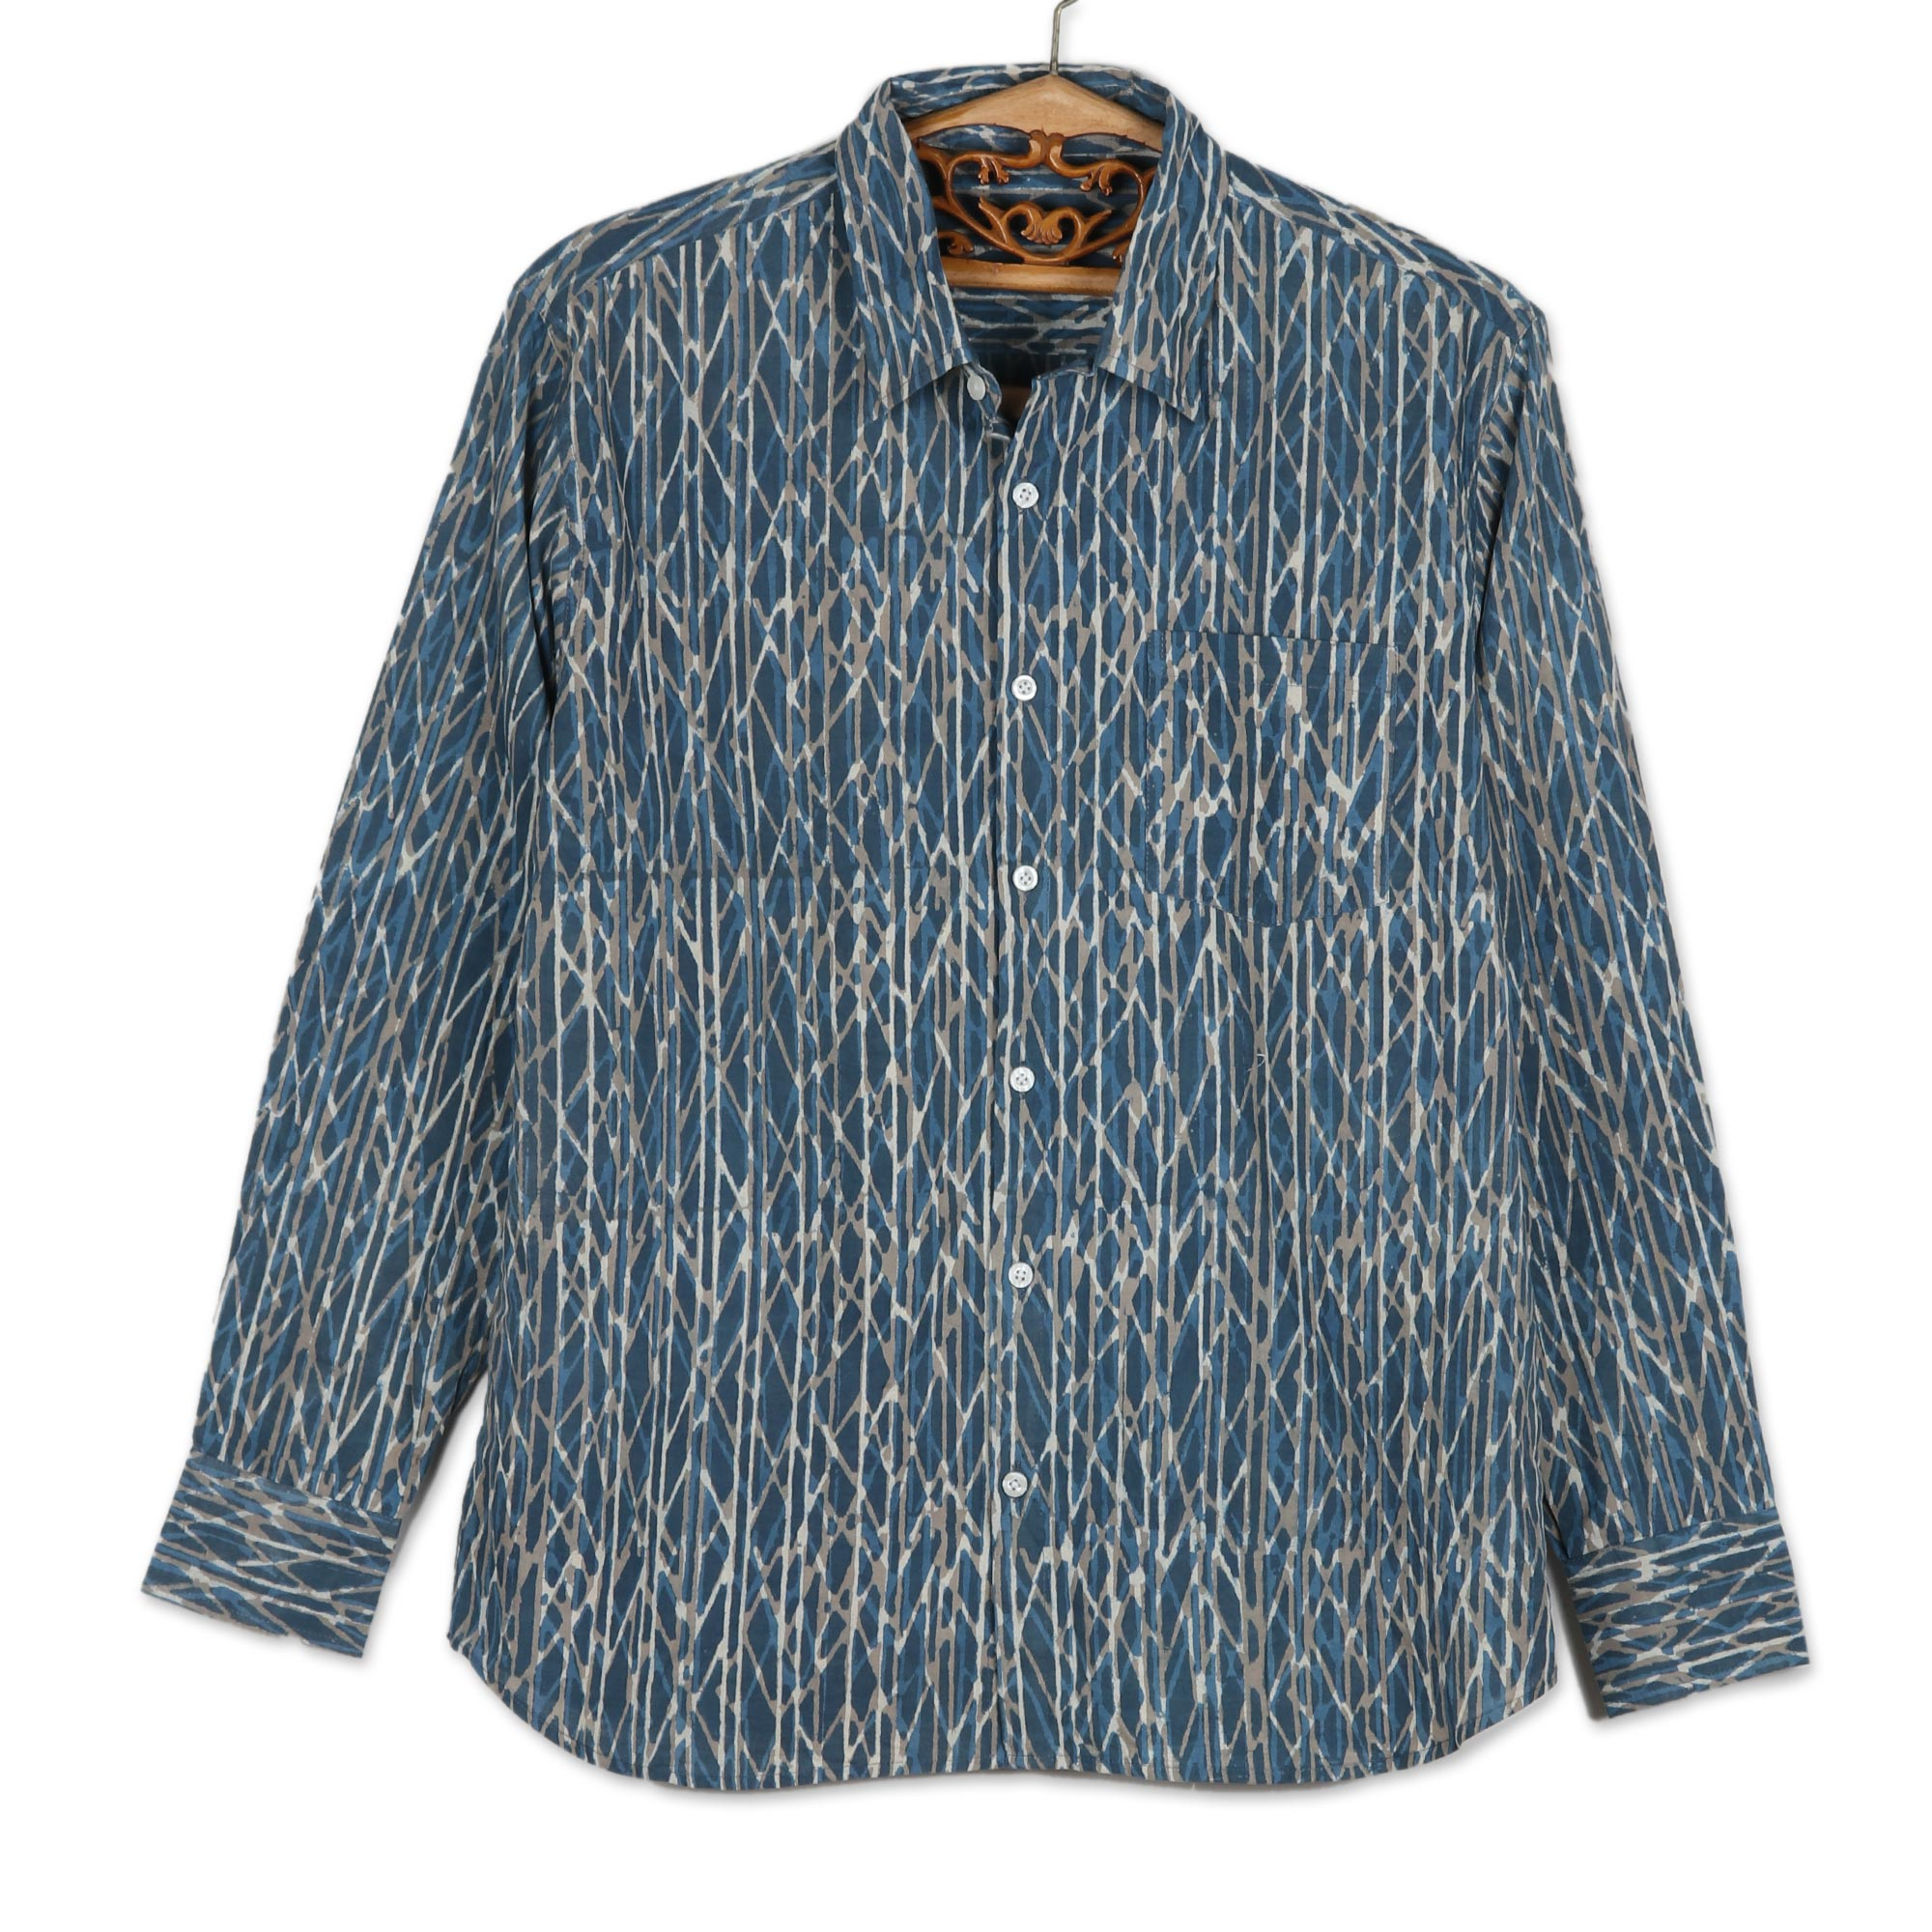 Men's Long-Sleeve Block-Printed Shirt from India - Traditional Elegance ...